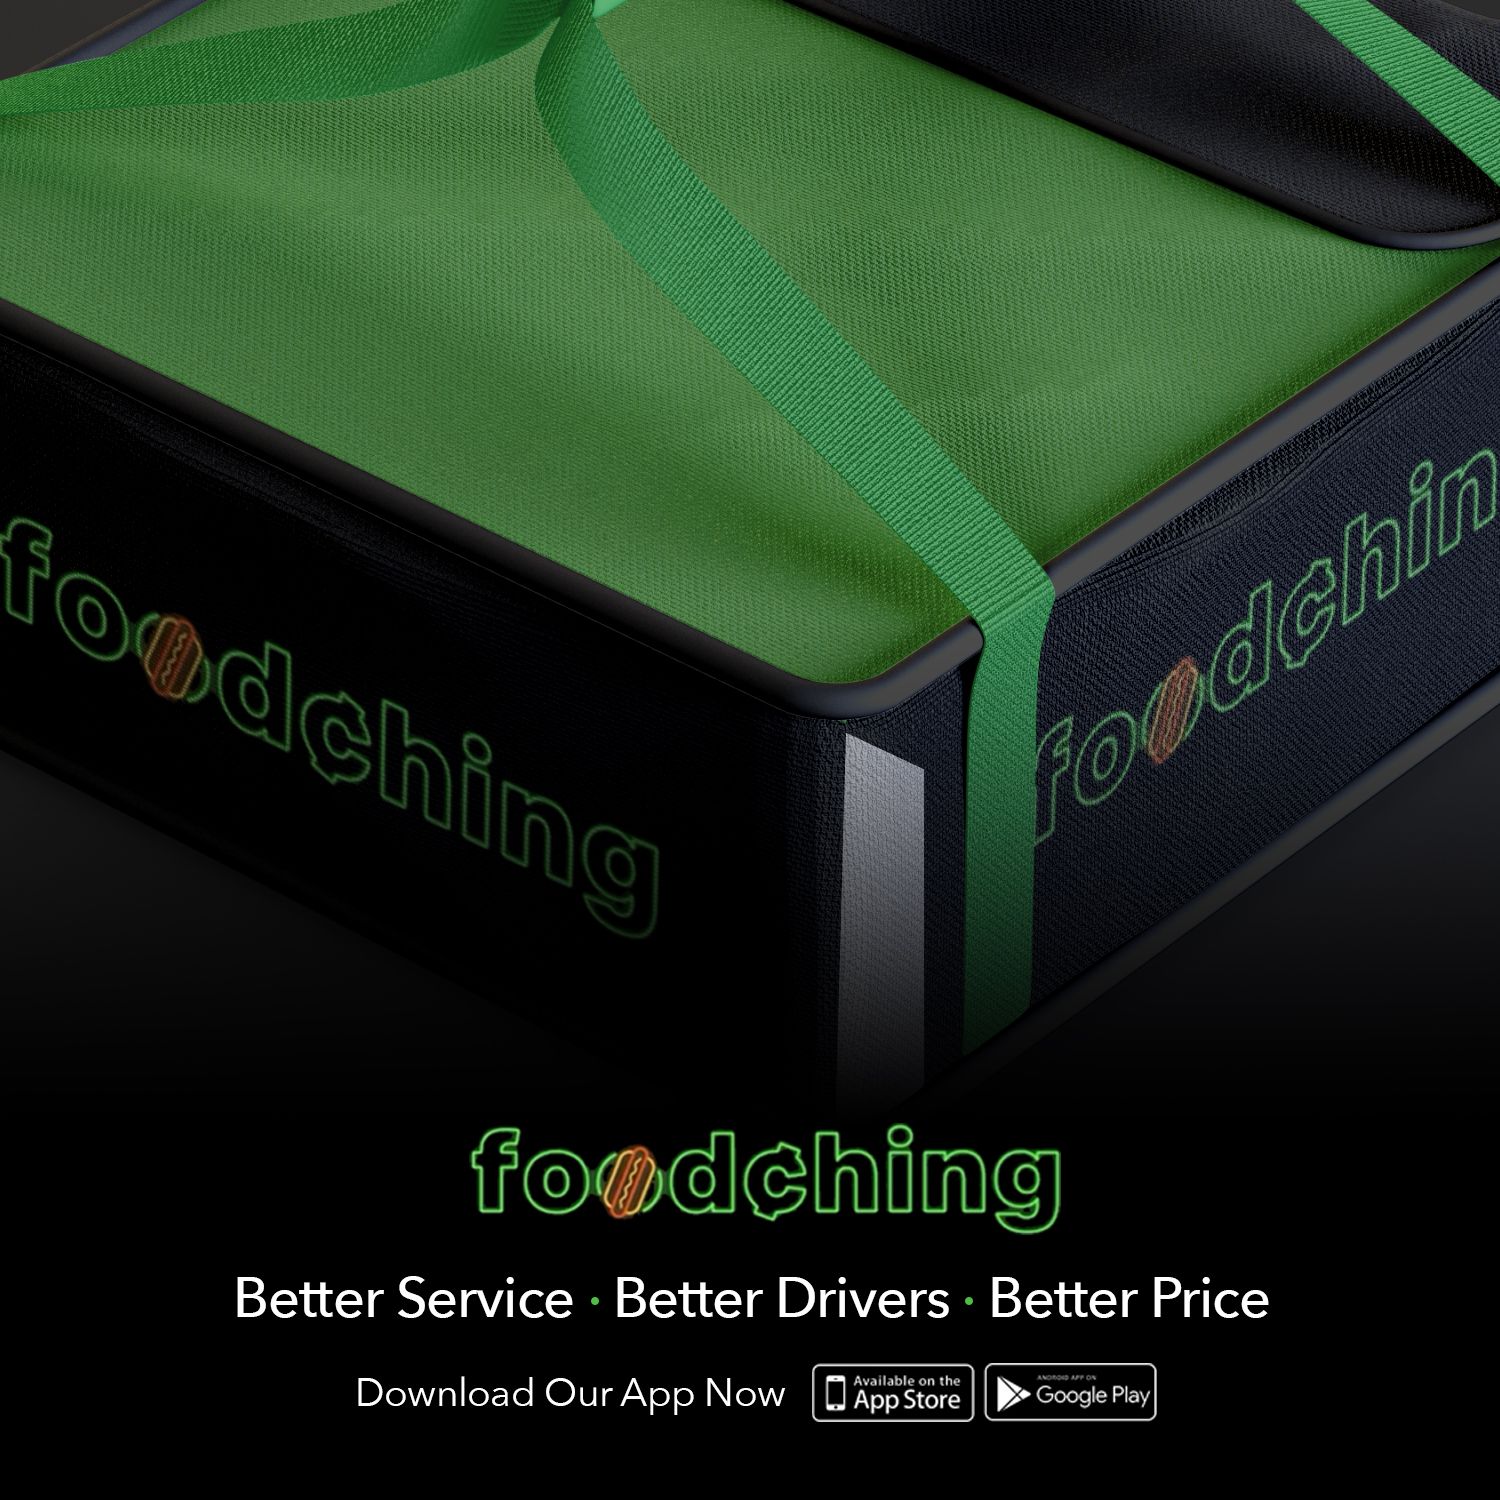 FoodChing Food & Drink Delivery  Launches in 40 Major Markets